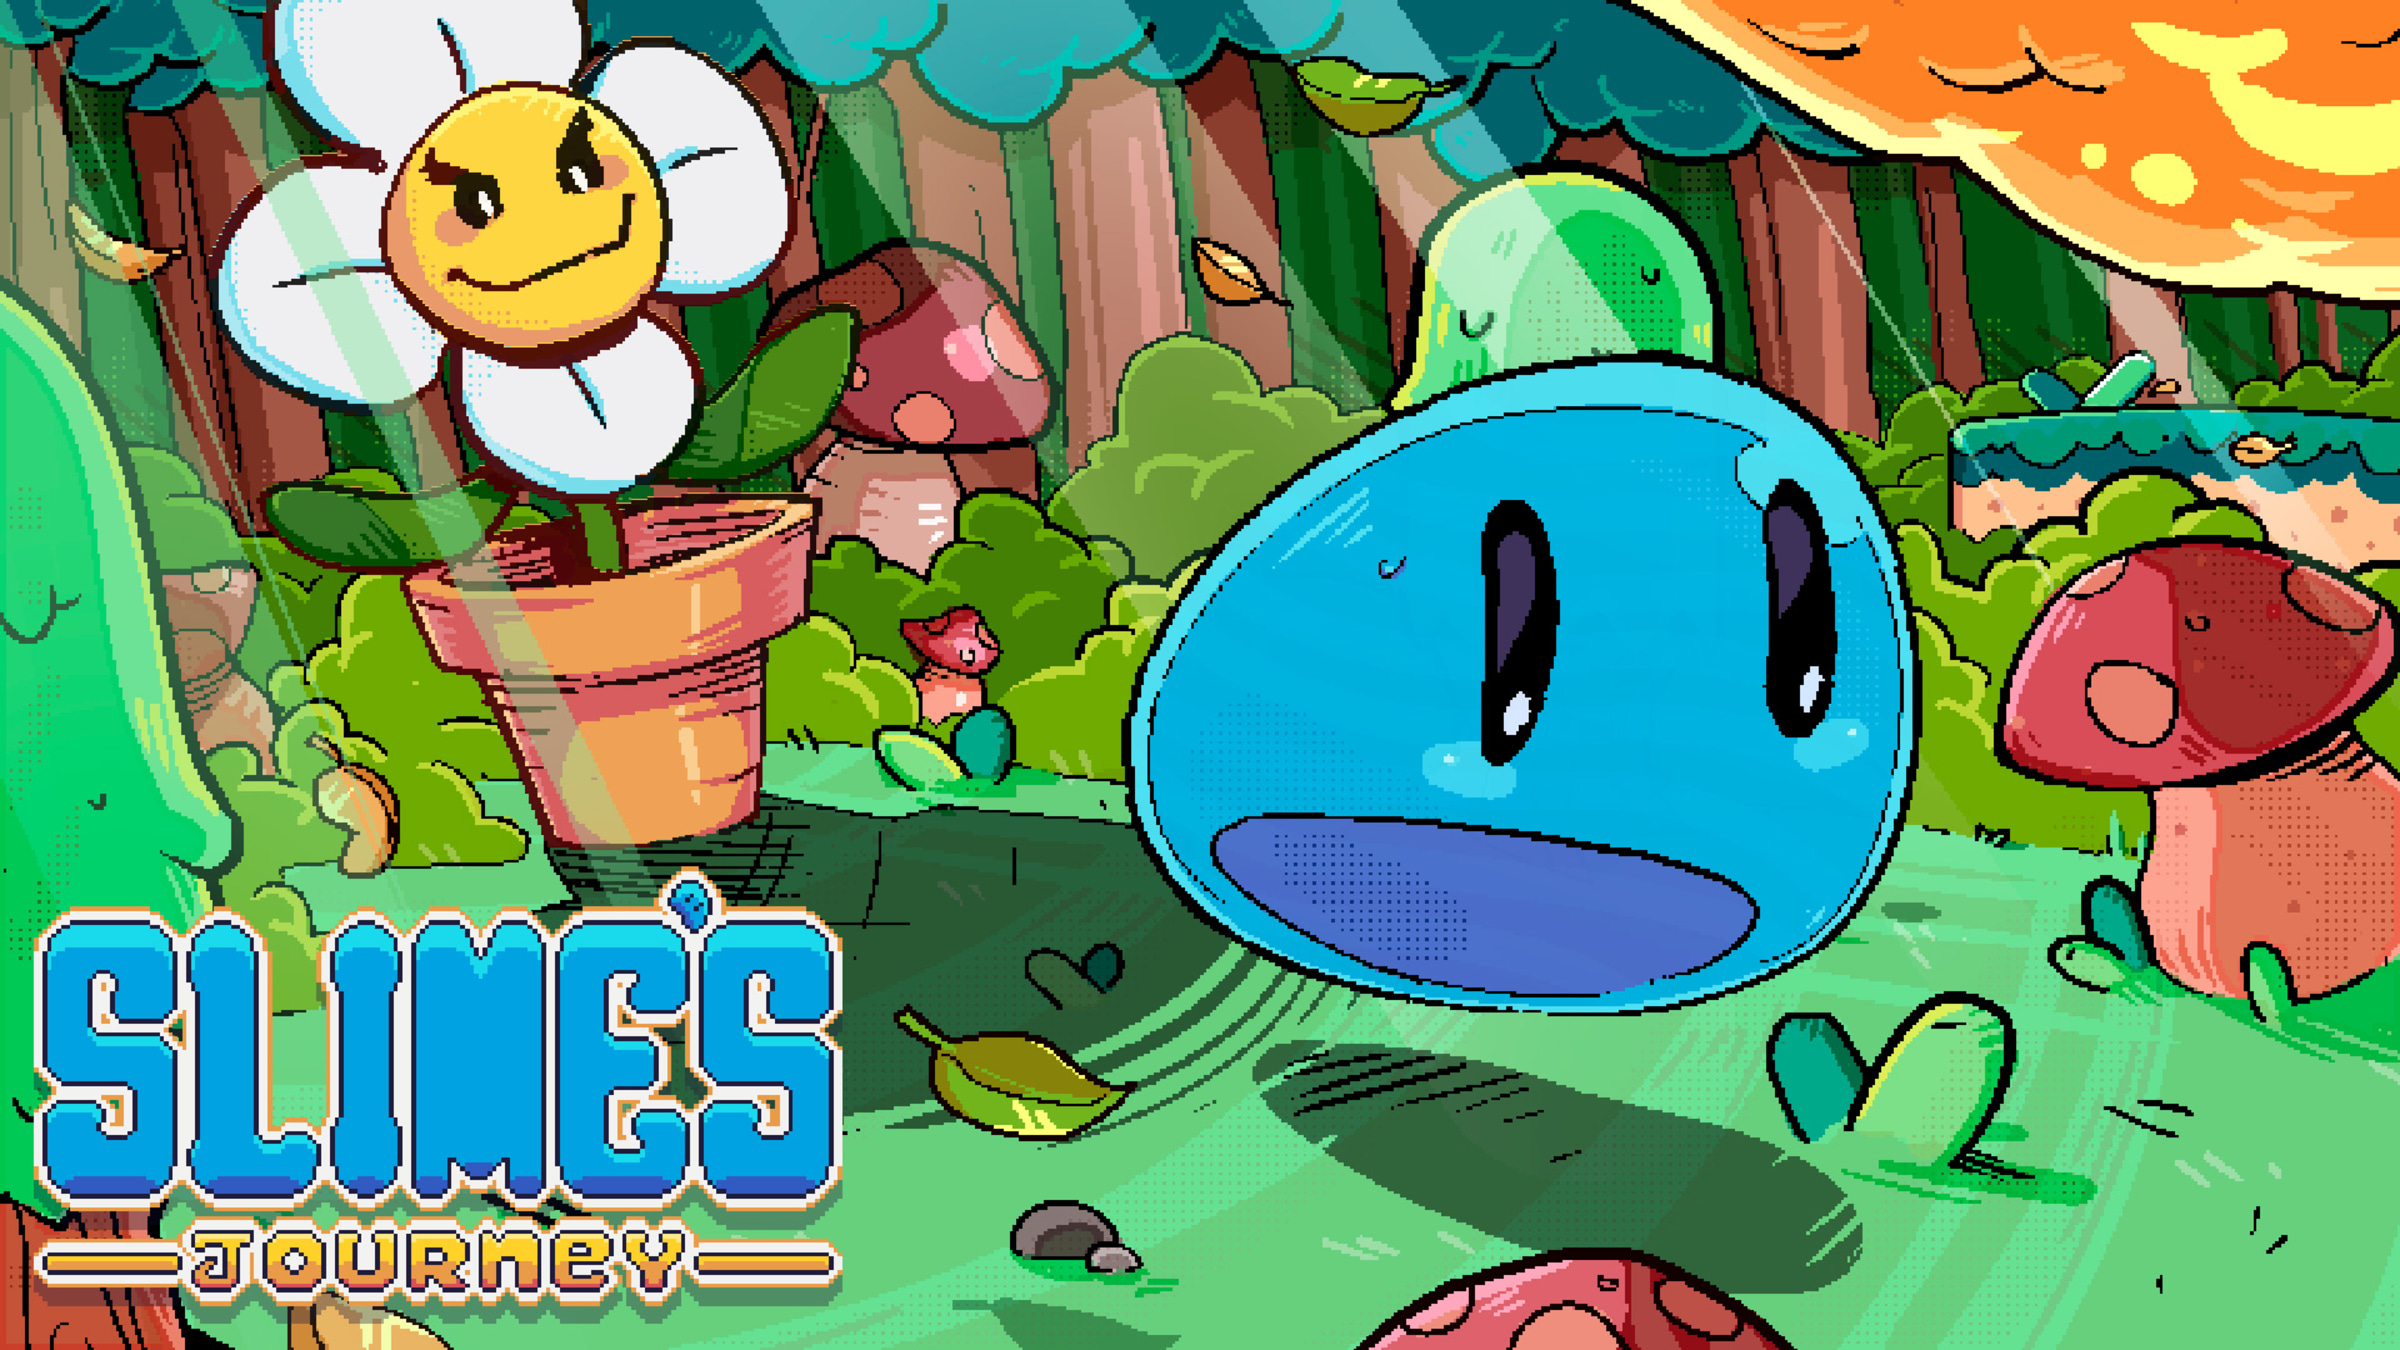 Pocket Slimes for Nintendo Switch - Nintendo Official Site